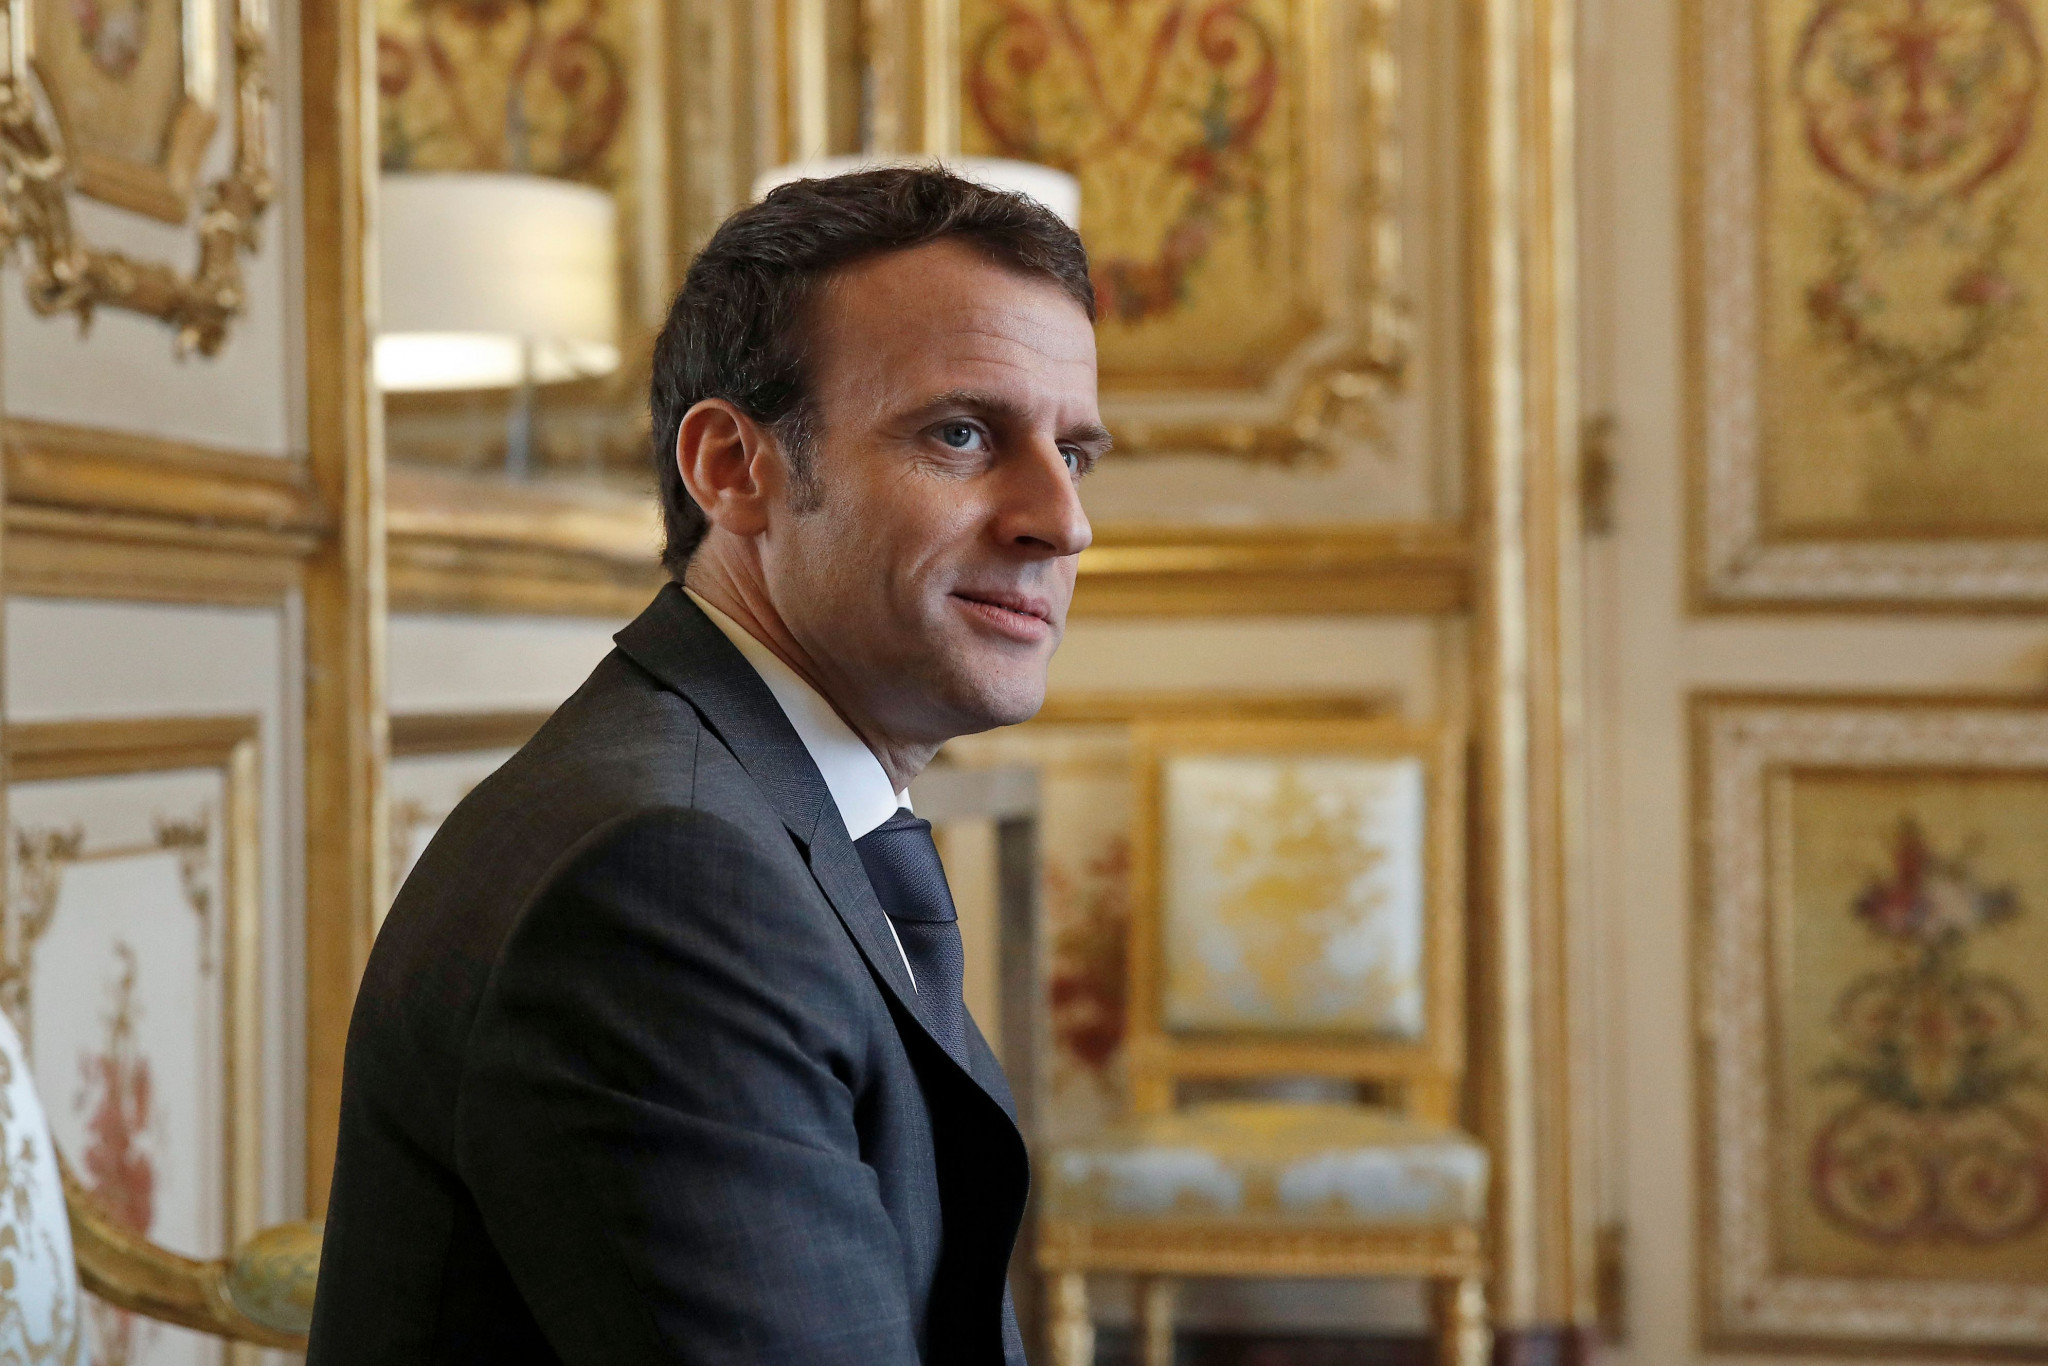 Macron says Paris 2024 must do more to help capital's poorest areas